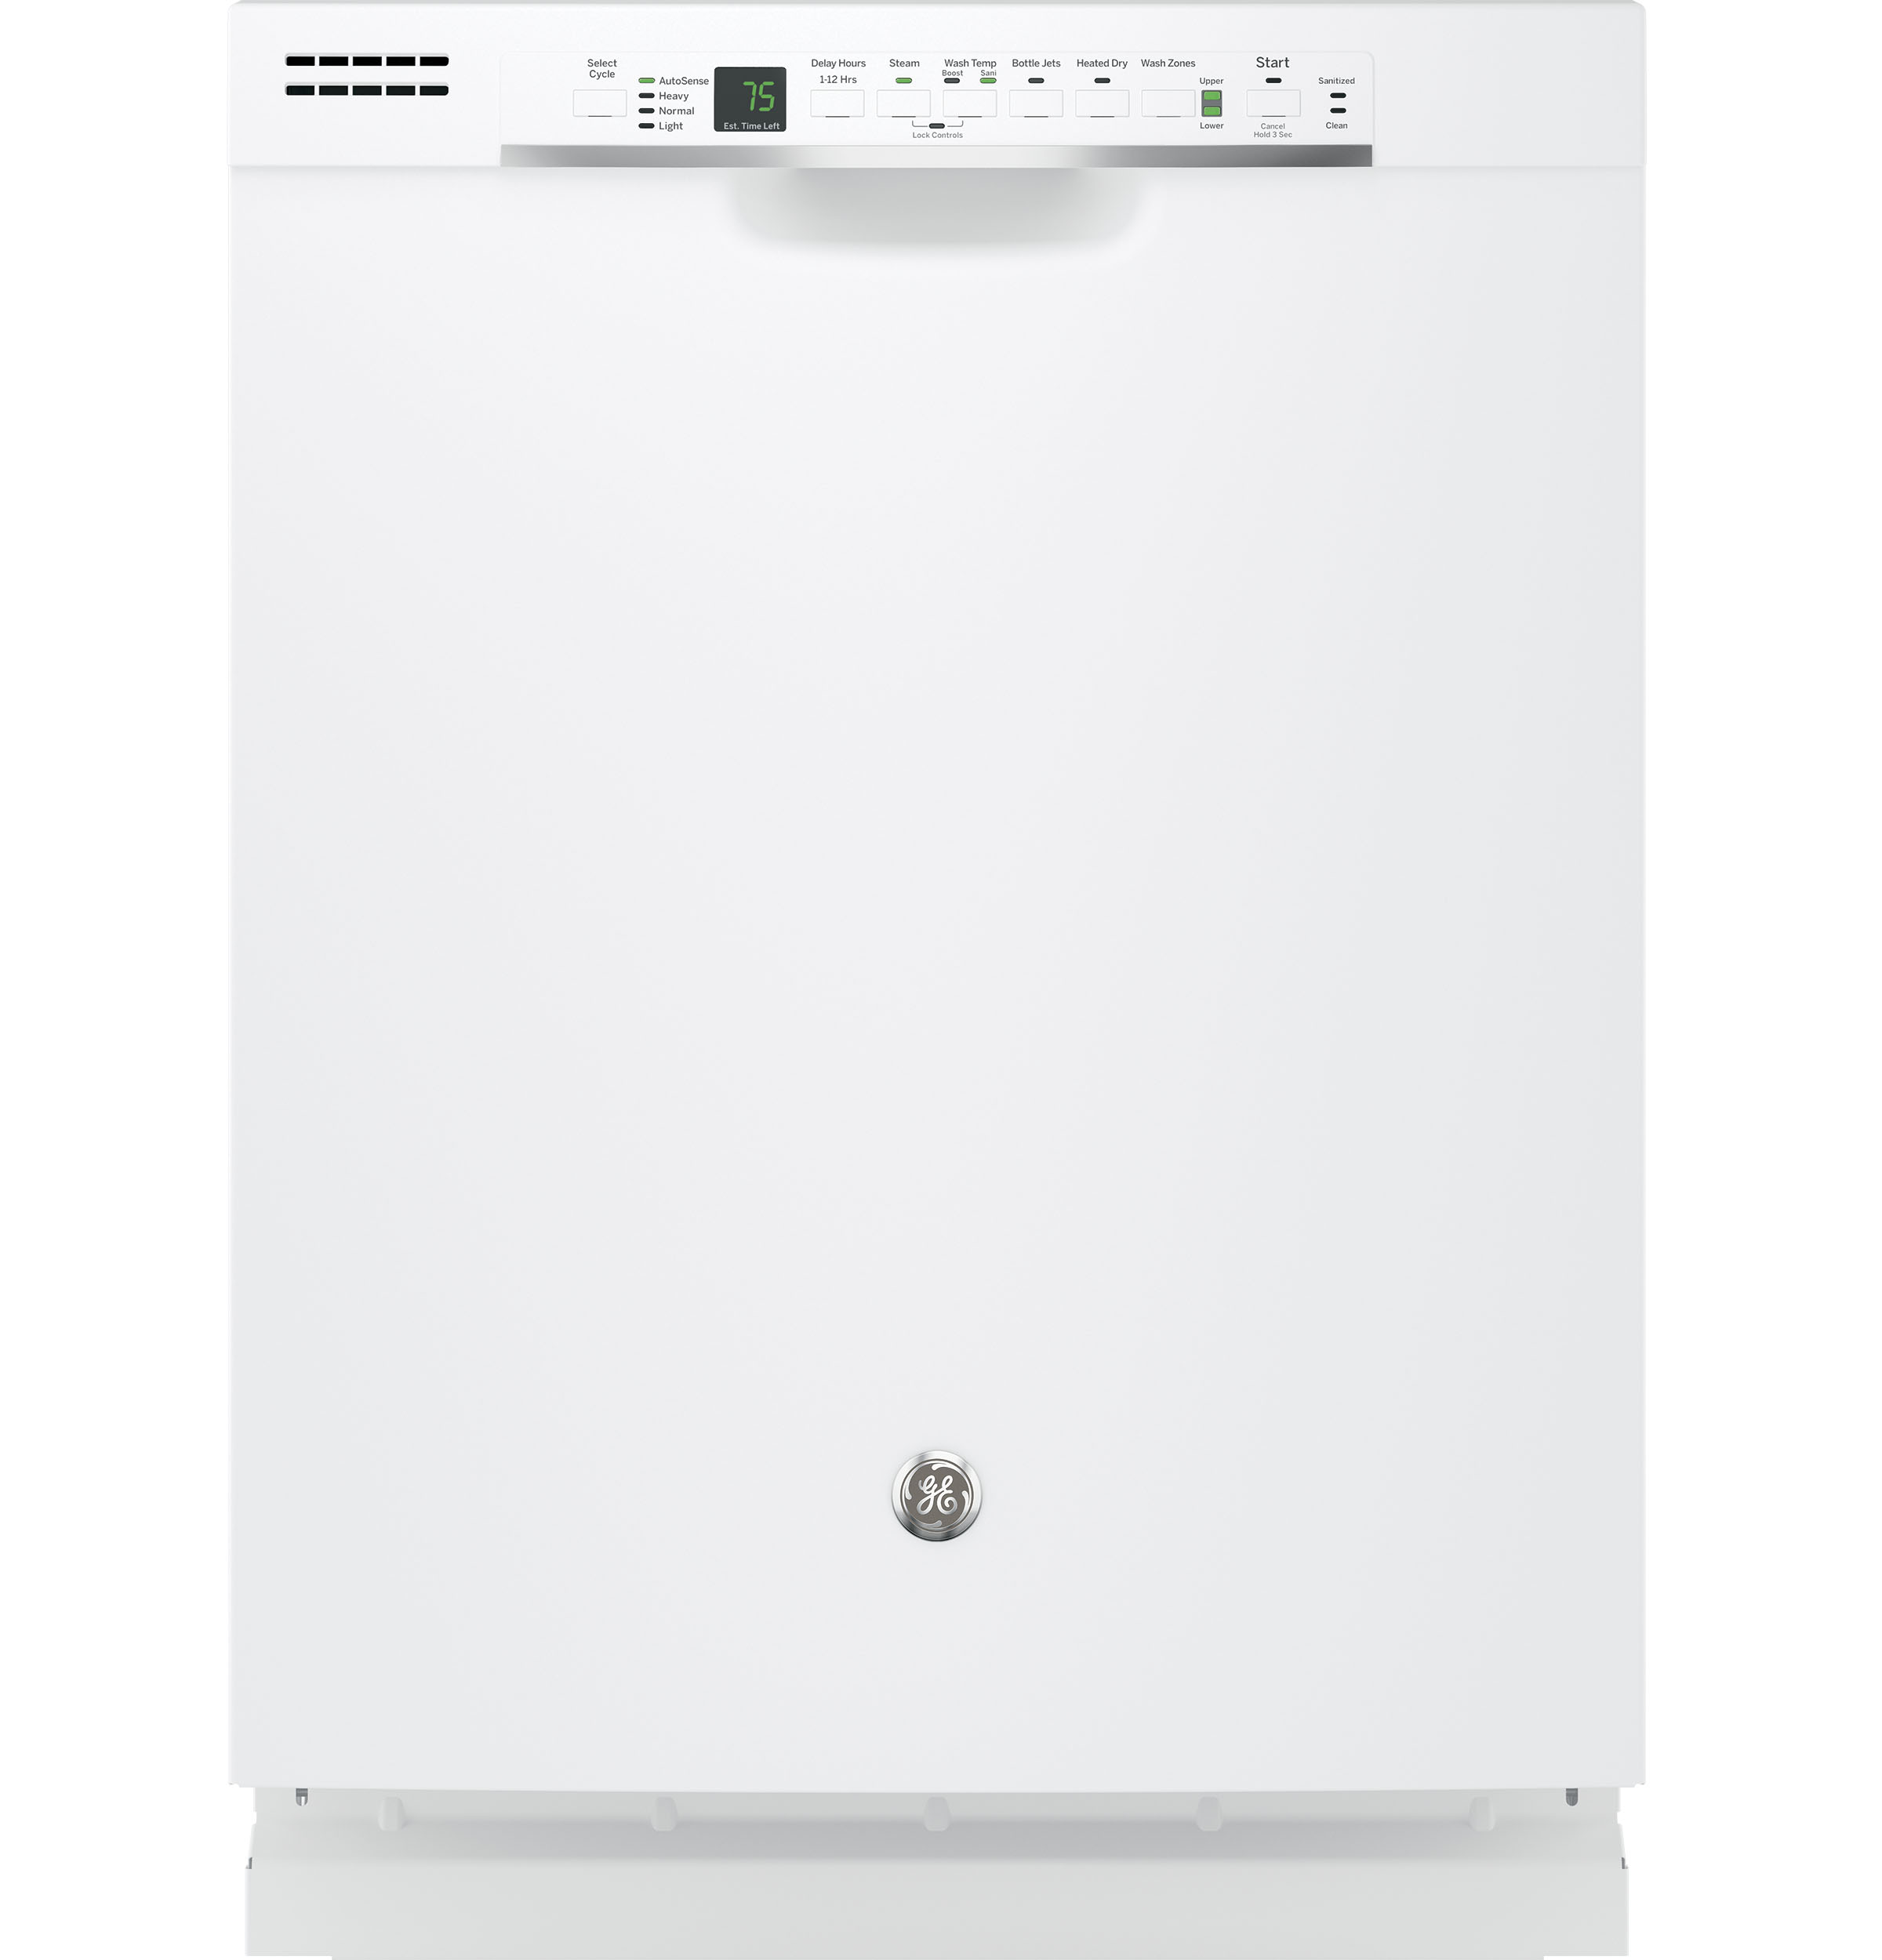 GE® Hybrid Stainless Steel Interior Dishwasher with Front Controls